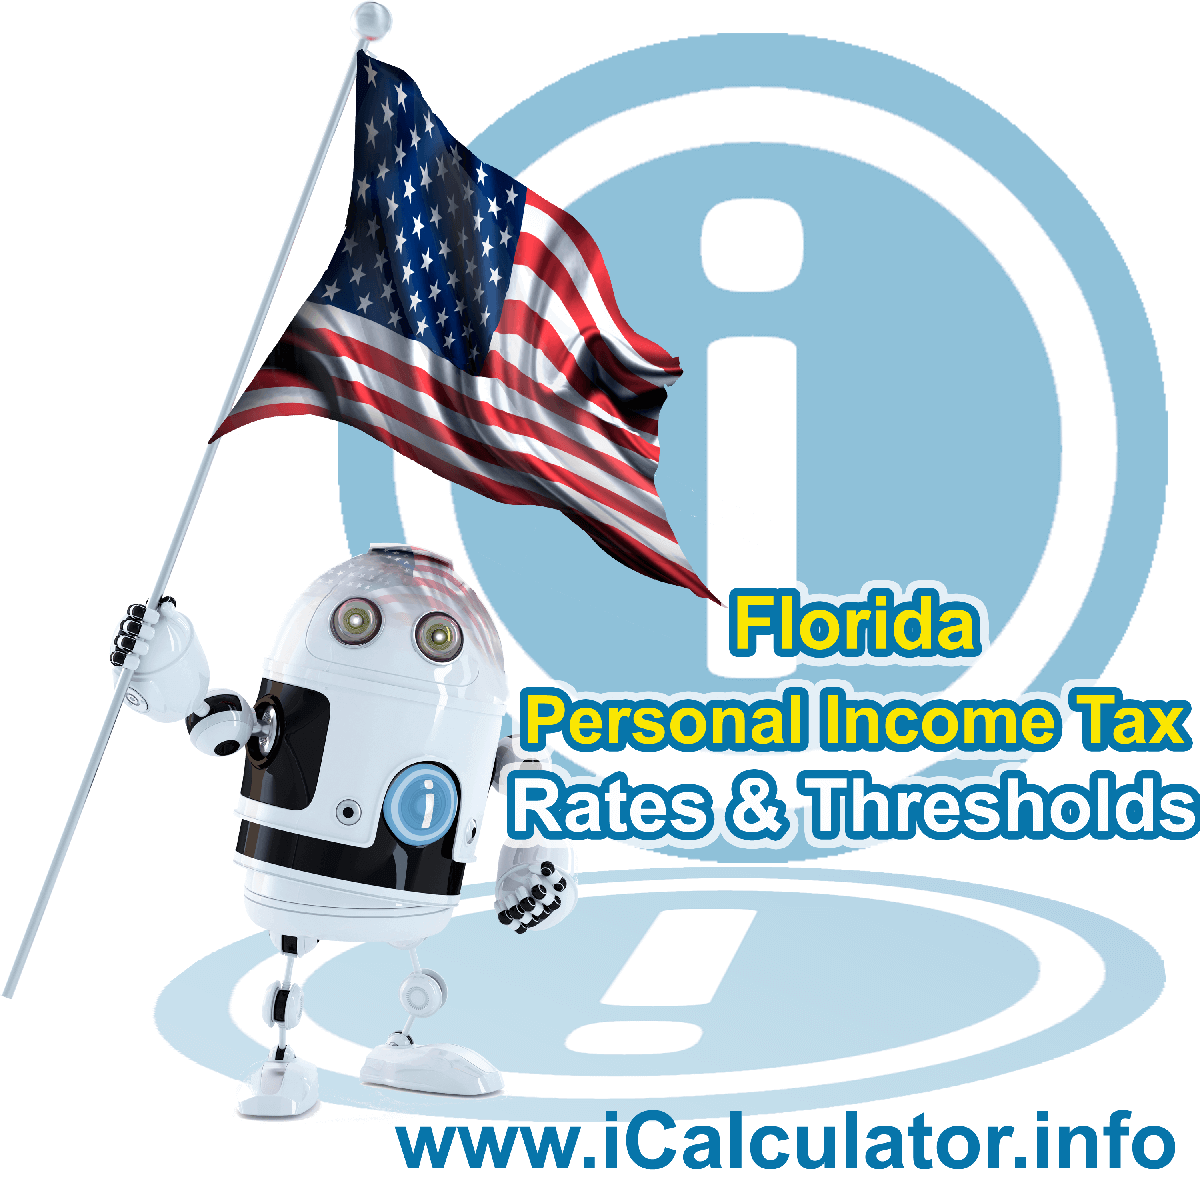 Florida State Tax Tables 2023. This image displays details of the Florida State Tax Tables for the 2023 tax return year which is provided in support of the 2023 US Tax Calculator